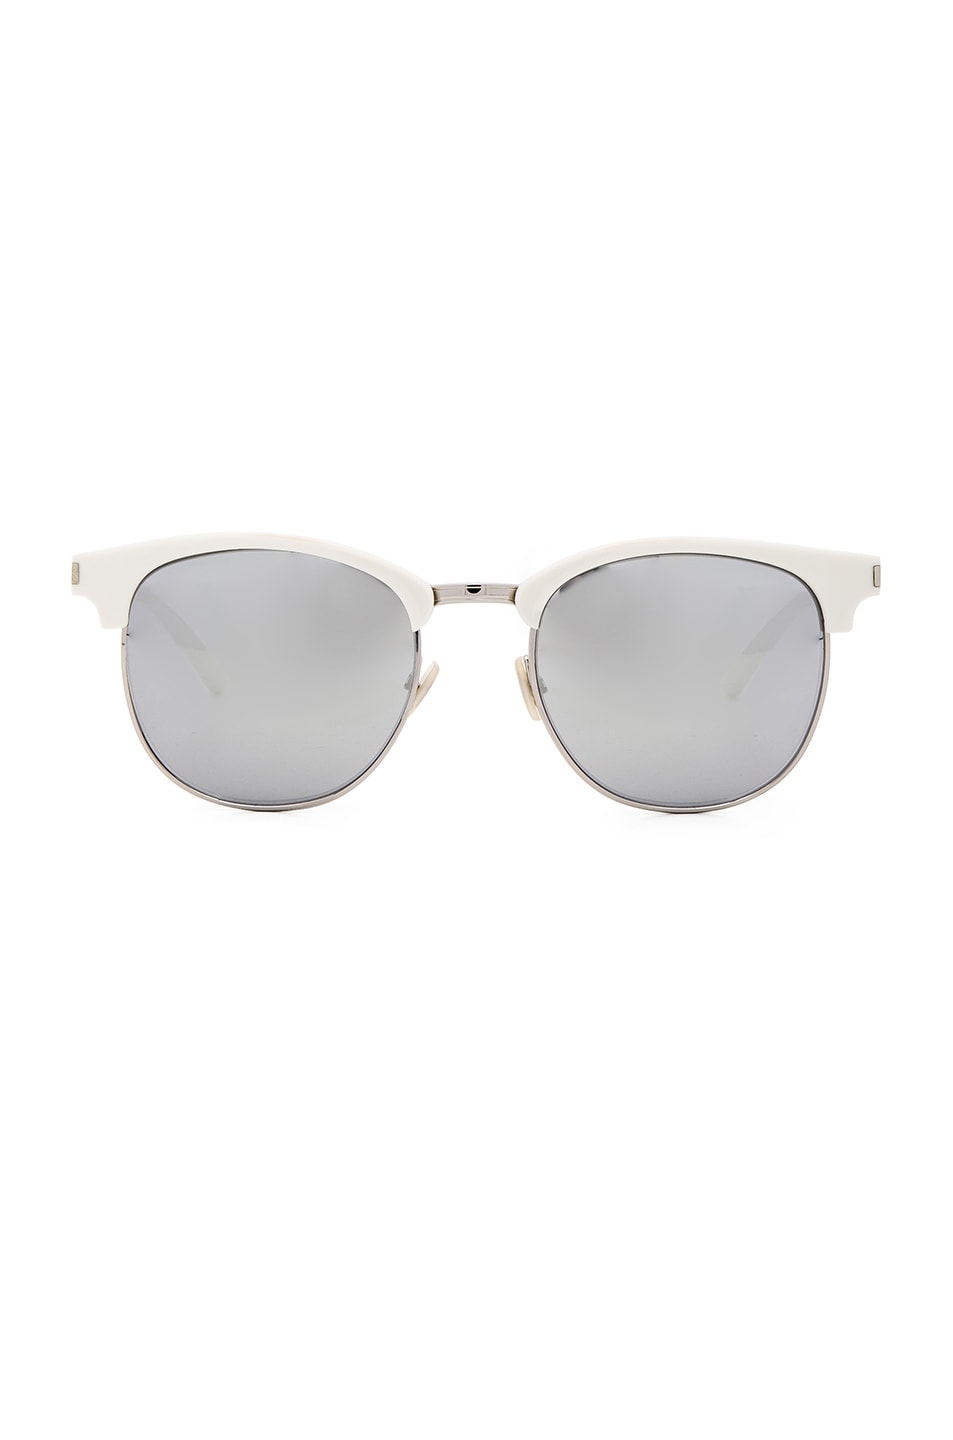 Image 1 of Saint Laurent SL 108 Surf Sunglasses in Ivory & Silver